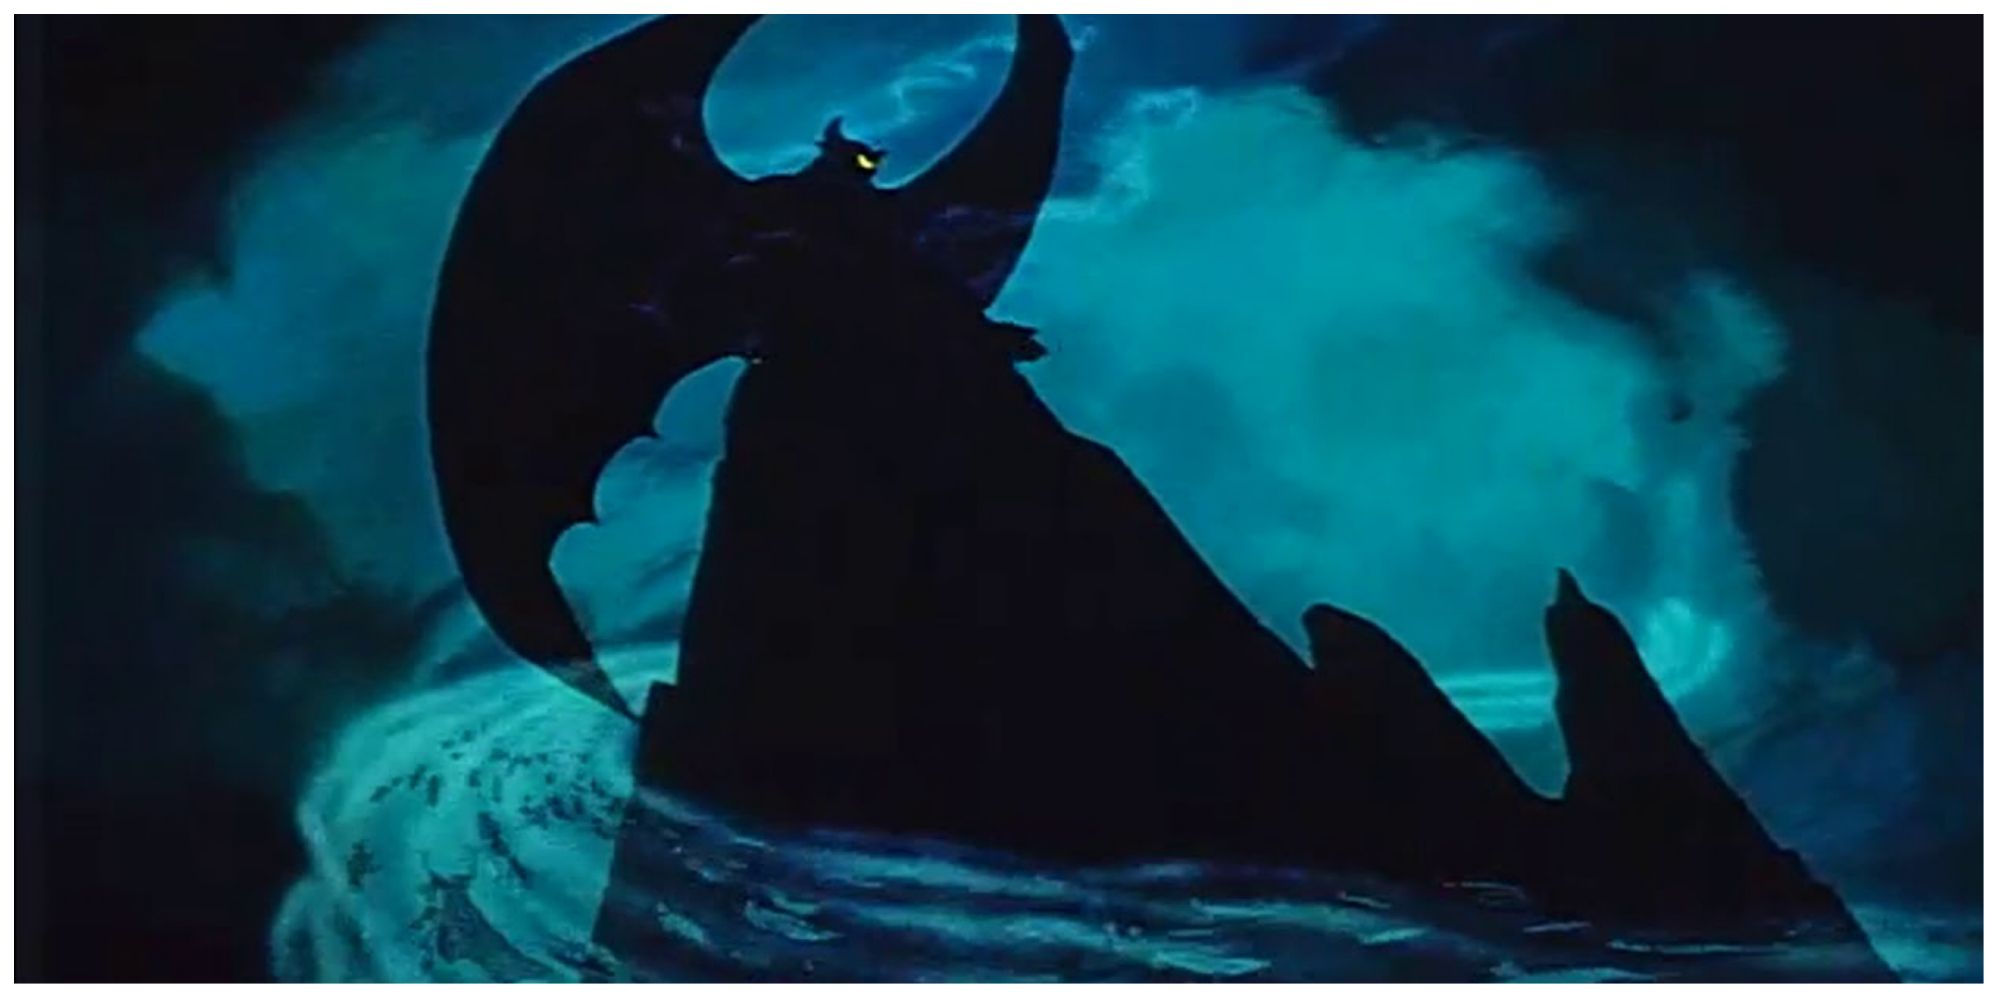 The Chernabog rising from Bald Mountain in Fantasia.